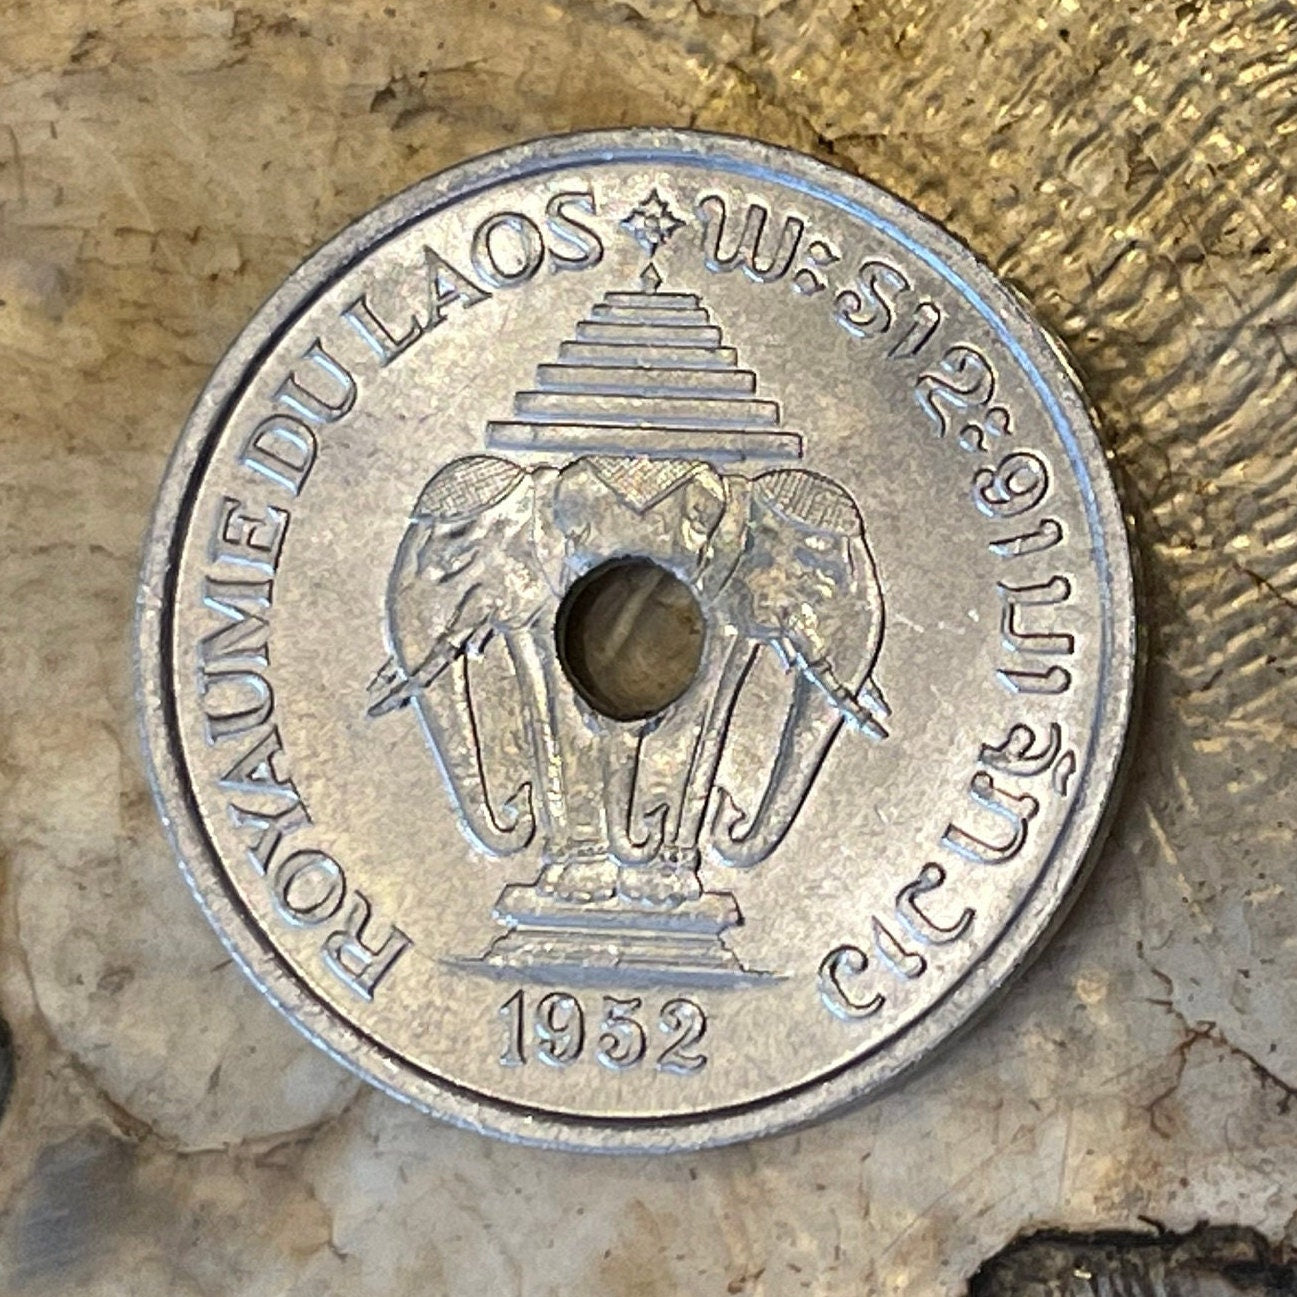 Airavata the 3-Headed White Elephant King 20 Cents Laos Authentic Coin Money for Jewelry (Lotus) (Hole in Coin) (1952) (7-Folded Umbrella)